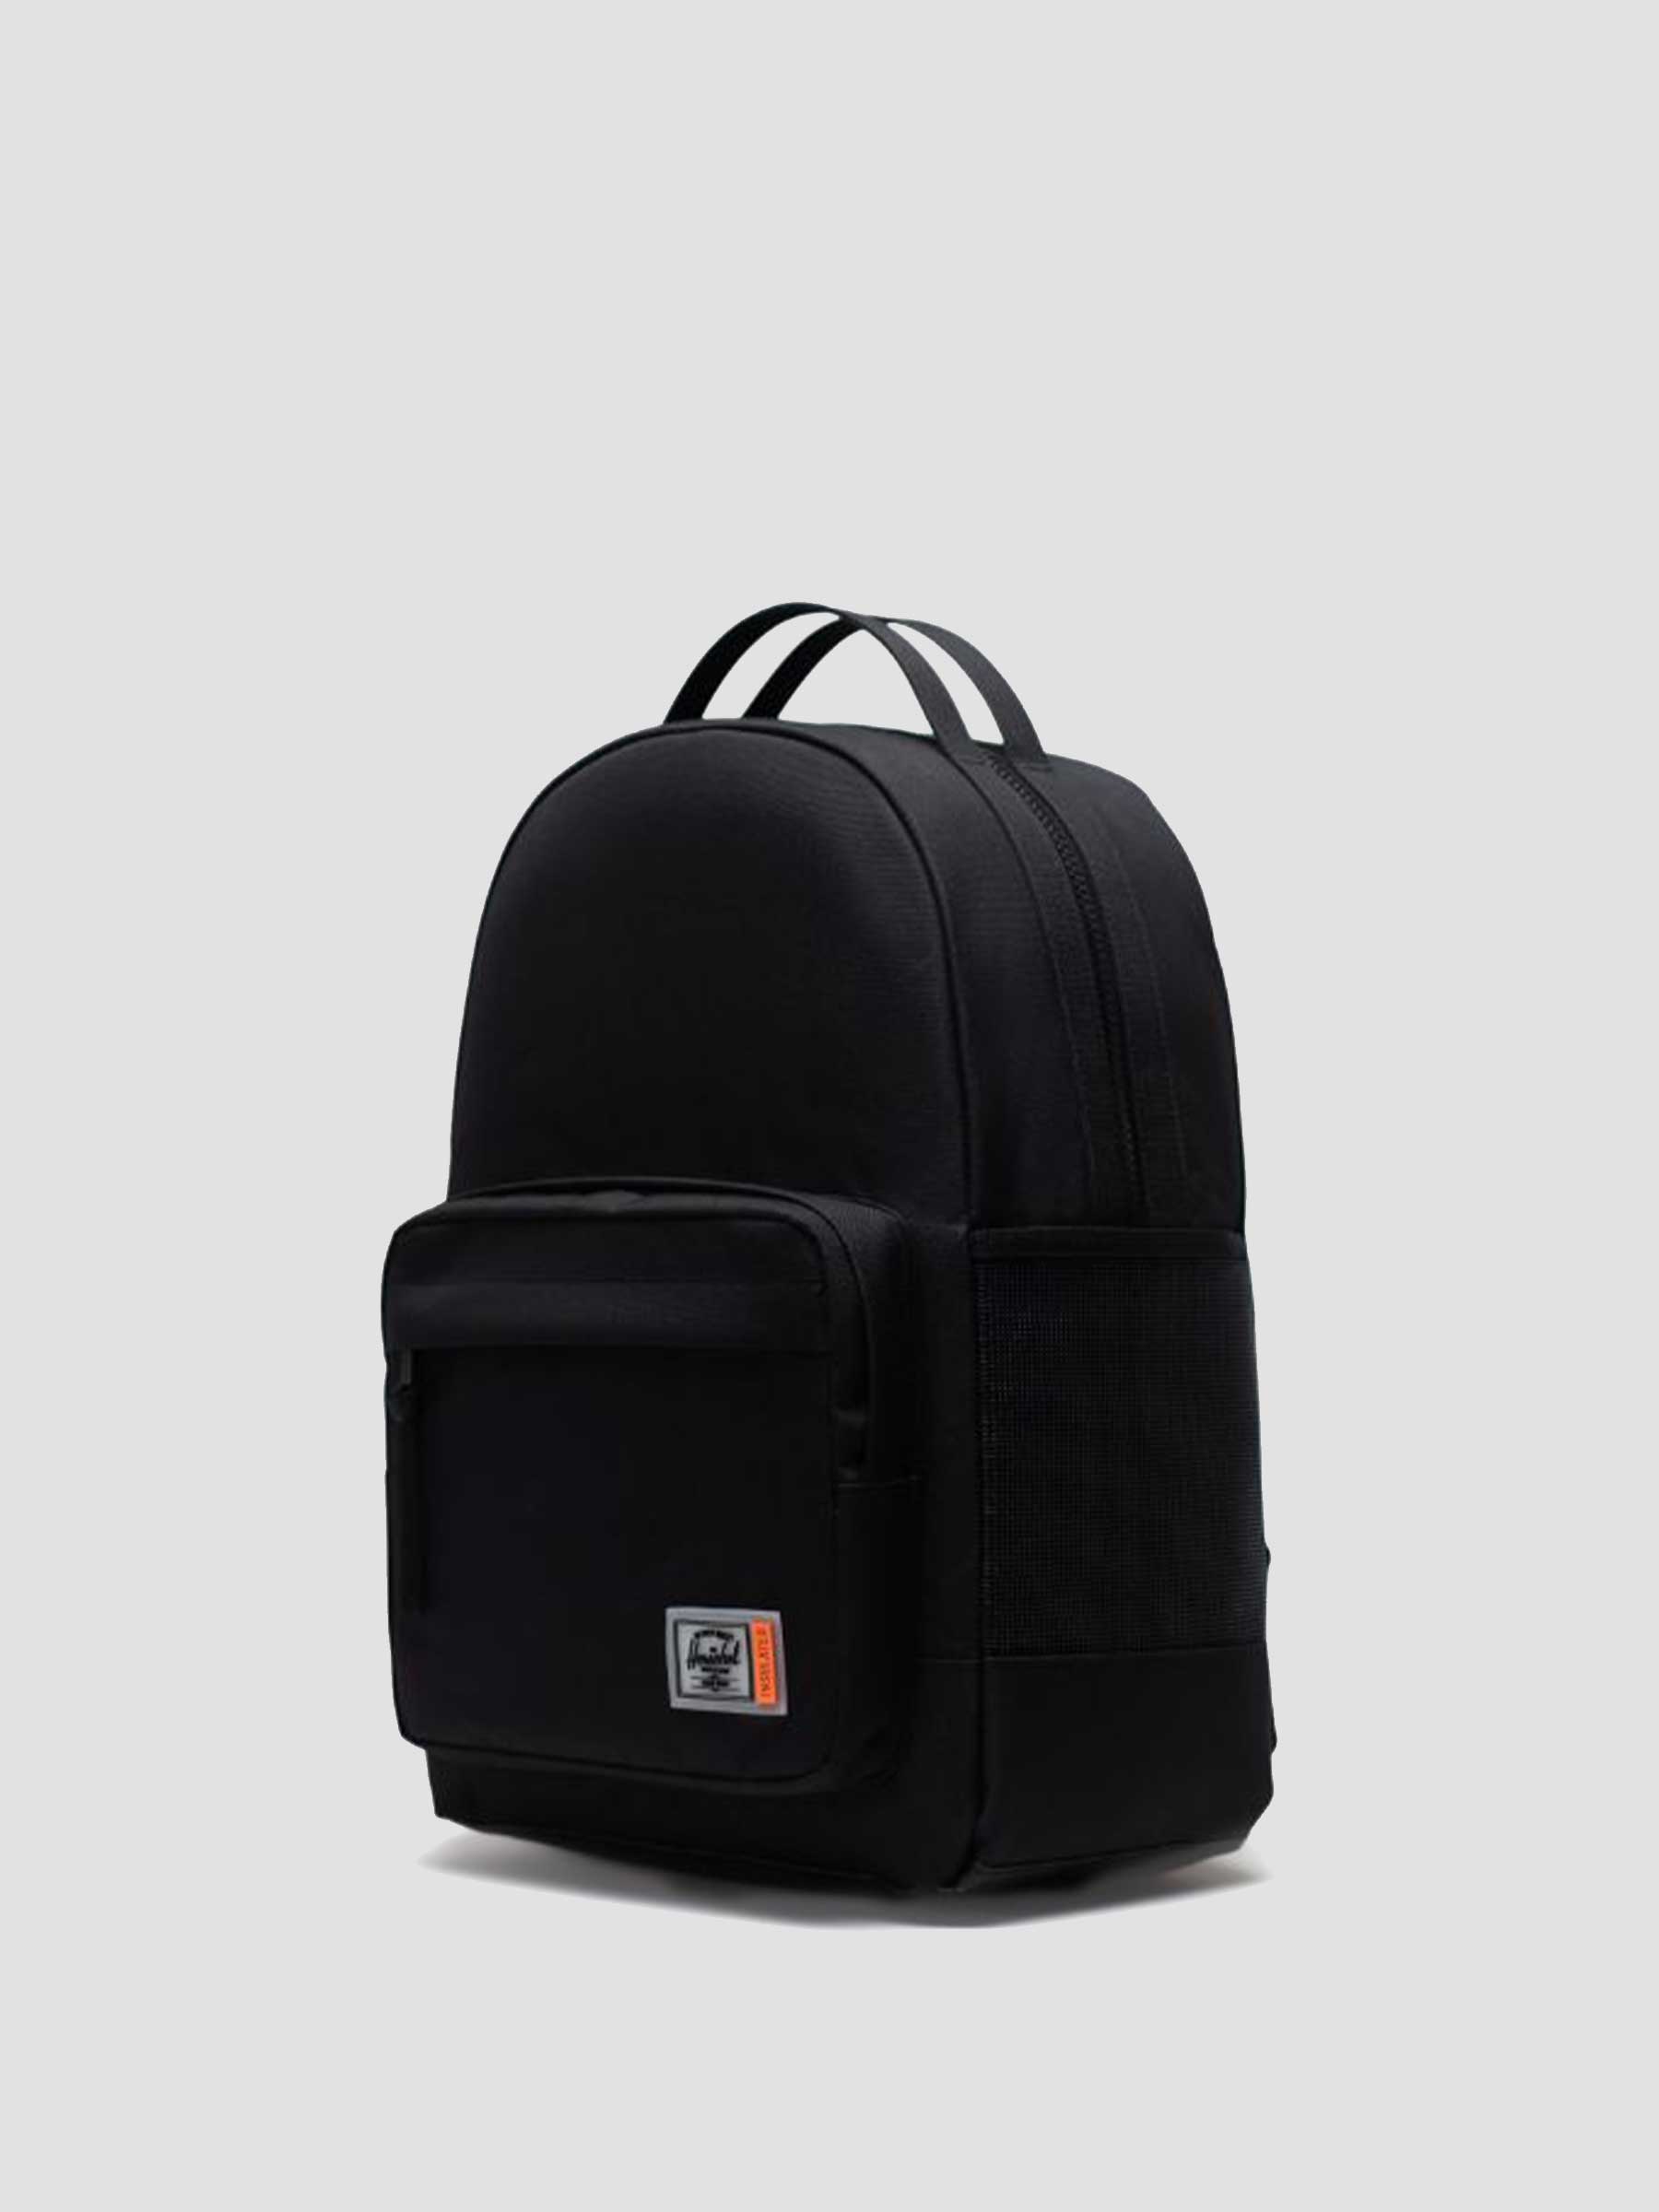 Insulated Miller Black 11068-00001-OS